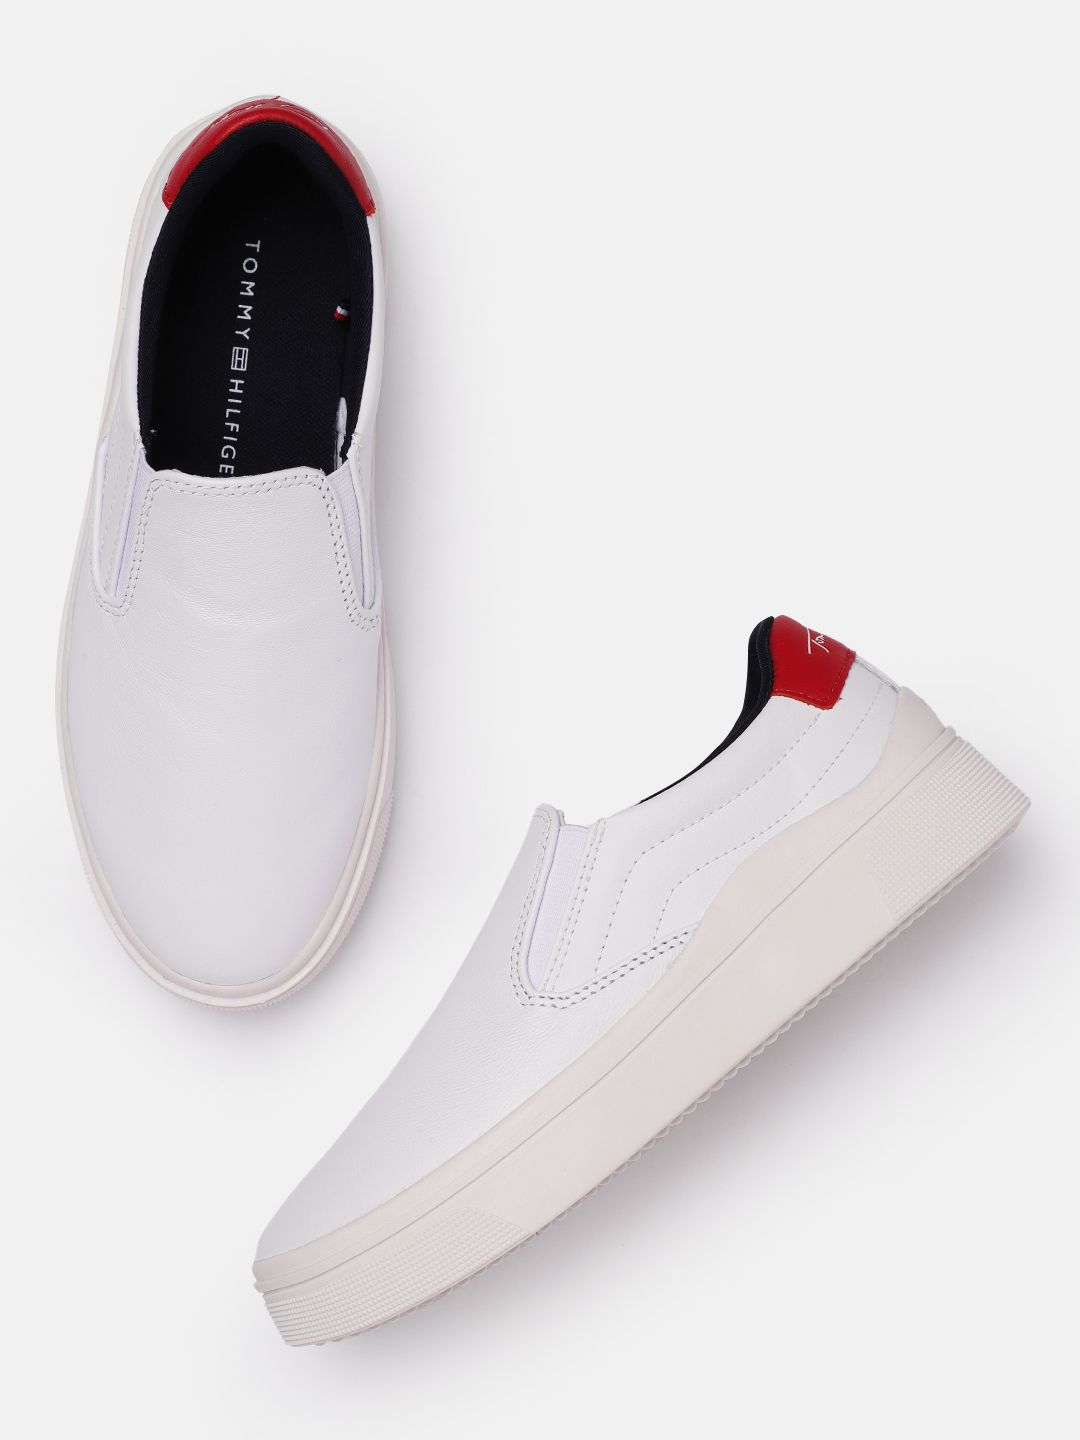 Tommy Hilfiger Women White Leather Slip-On Sneakers Price in India